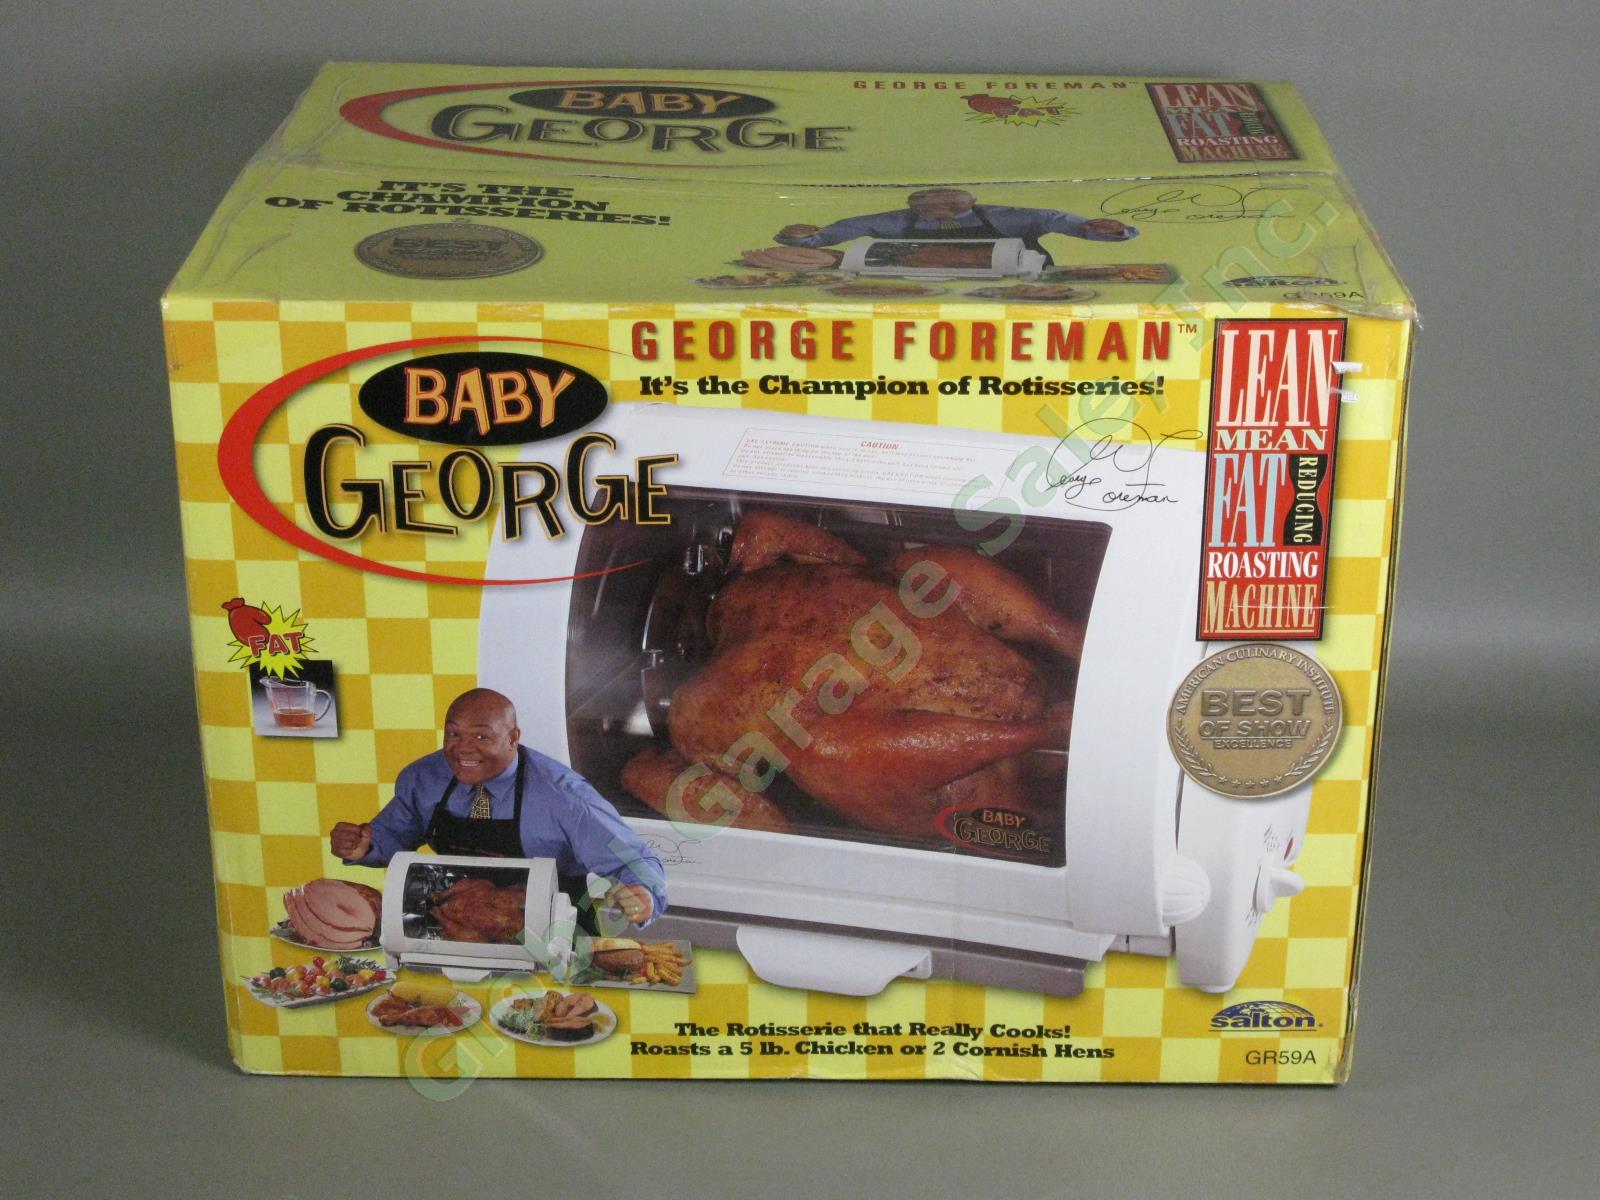 New In Box! George Foreman Baby George Rotisserie Roasting Machine Model GR59A